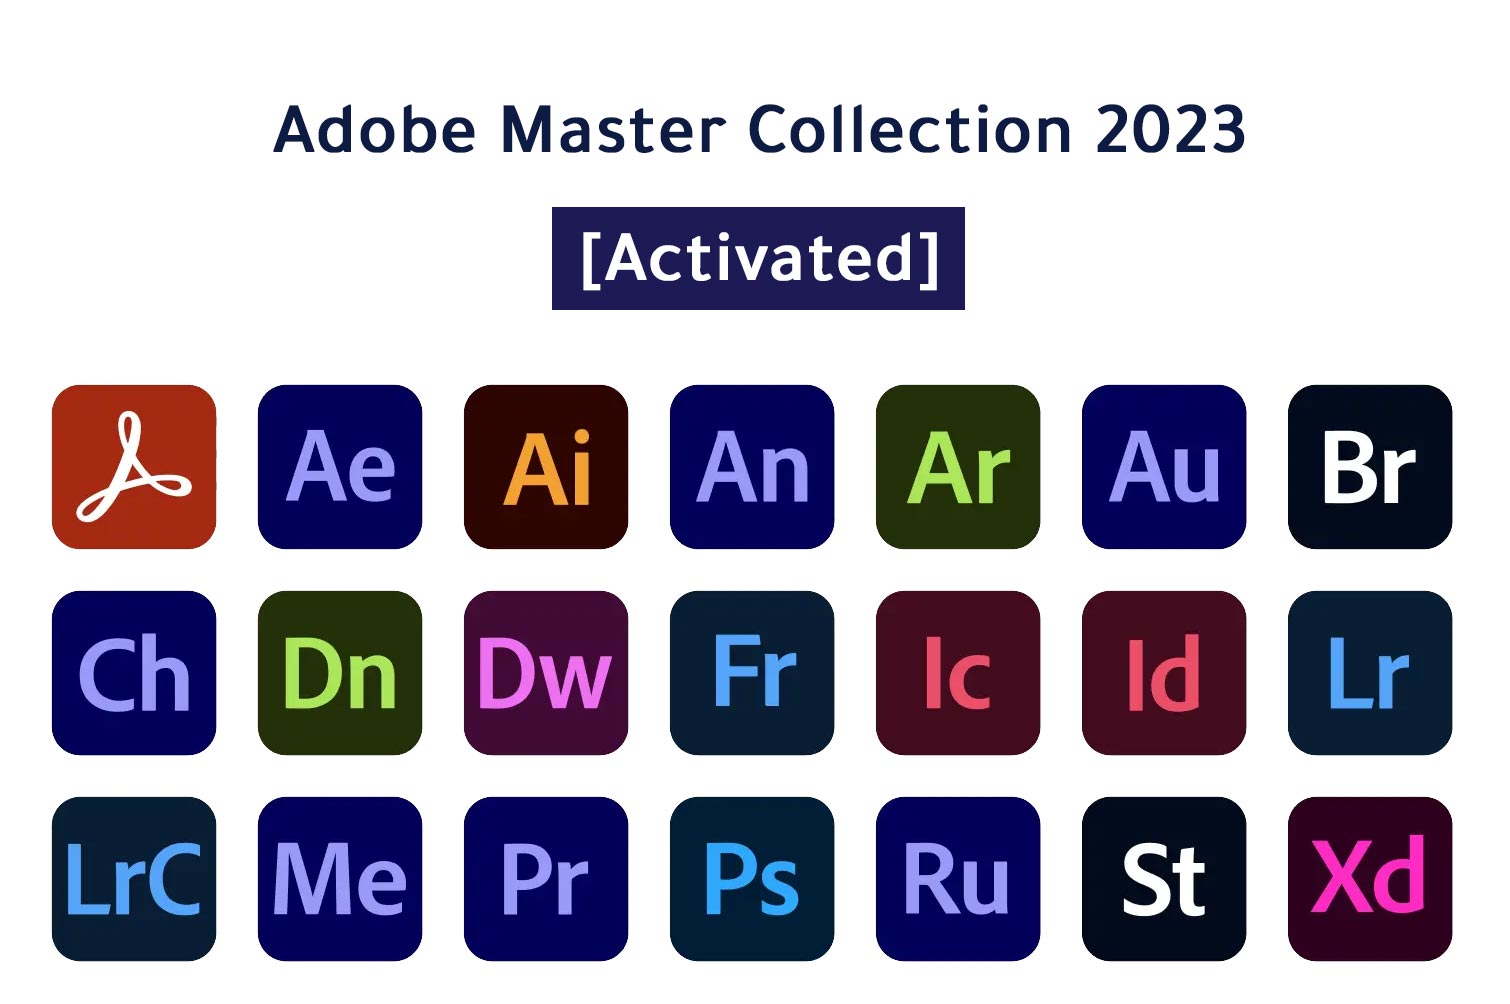 Adobe Master Collection is a suite of software applications that are developed by Adobe Systems. It includes a range of professional software programs, such as Adobe Photoshop, Adobe Illustrator, Adobe InDesign, Adobe Premiere Pro, Adobe After Effects, Adobe Dreamweaver, Adobe Acrobat, and many more. The collection is designed for creative professionals, graphic designers, web developers, video editors, and other multimedia professionals who need advanced tools to create high-quality content.